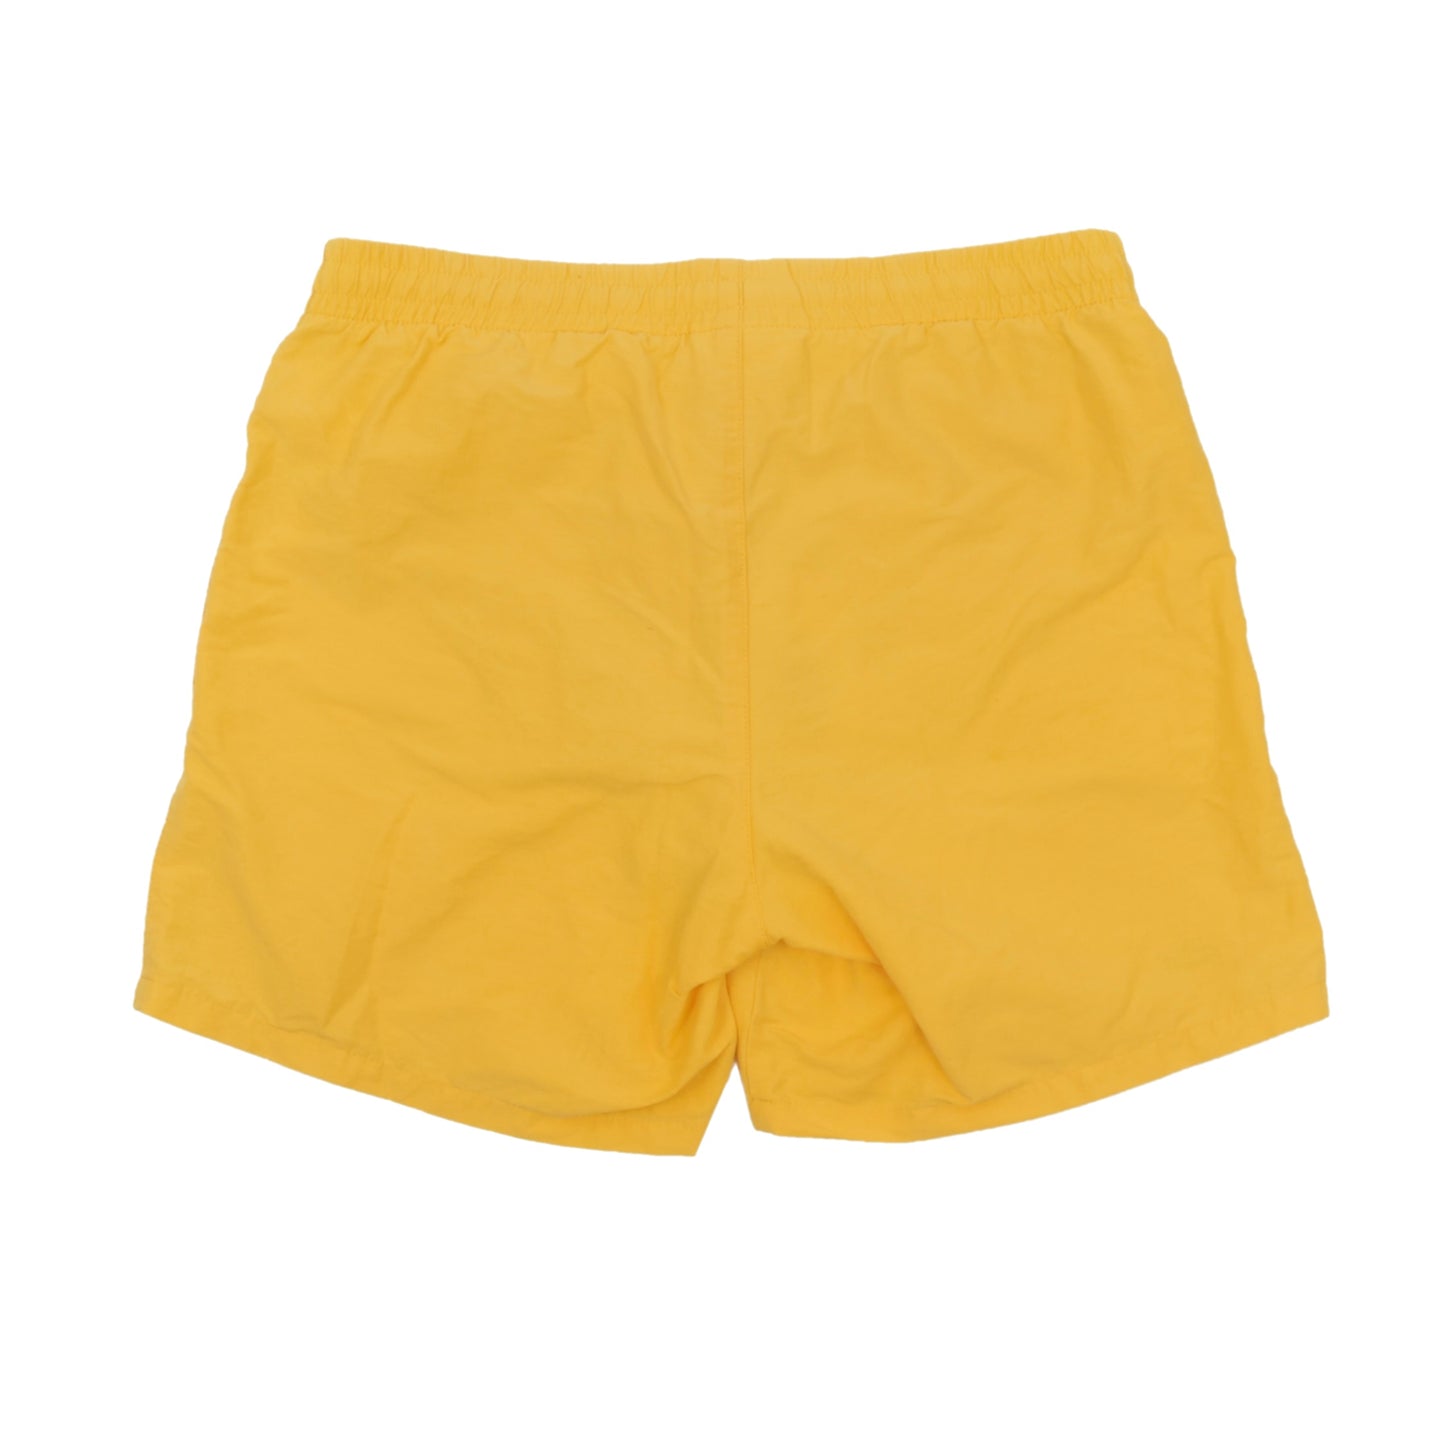 2x Lacoste Swim Trunks Size S - Yellow & Red